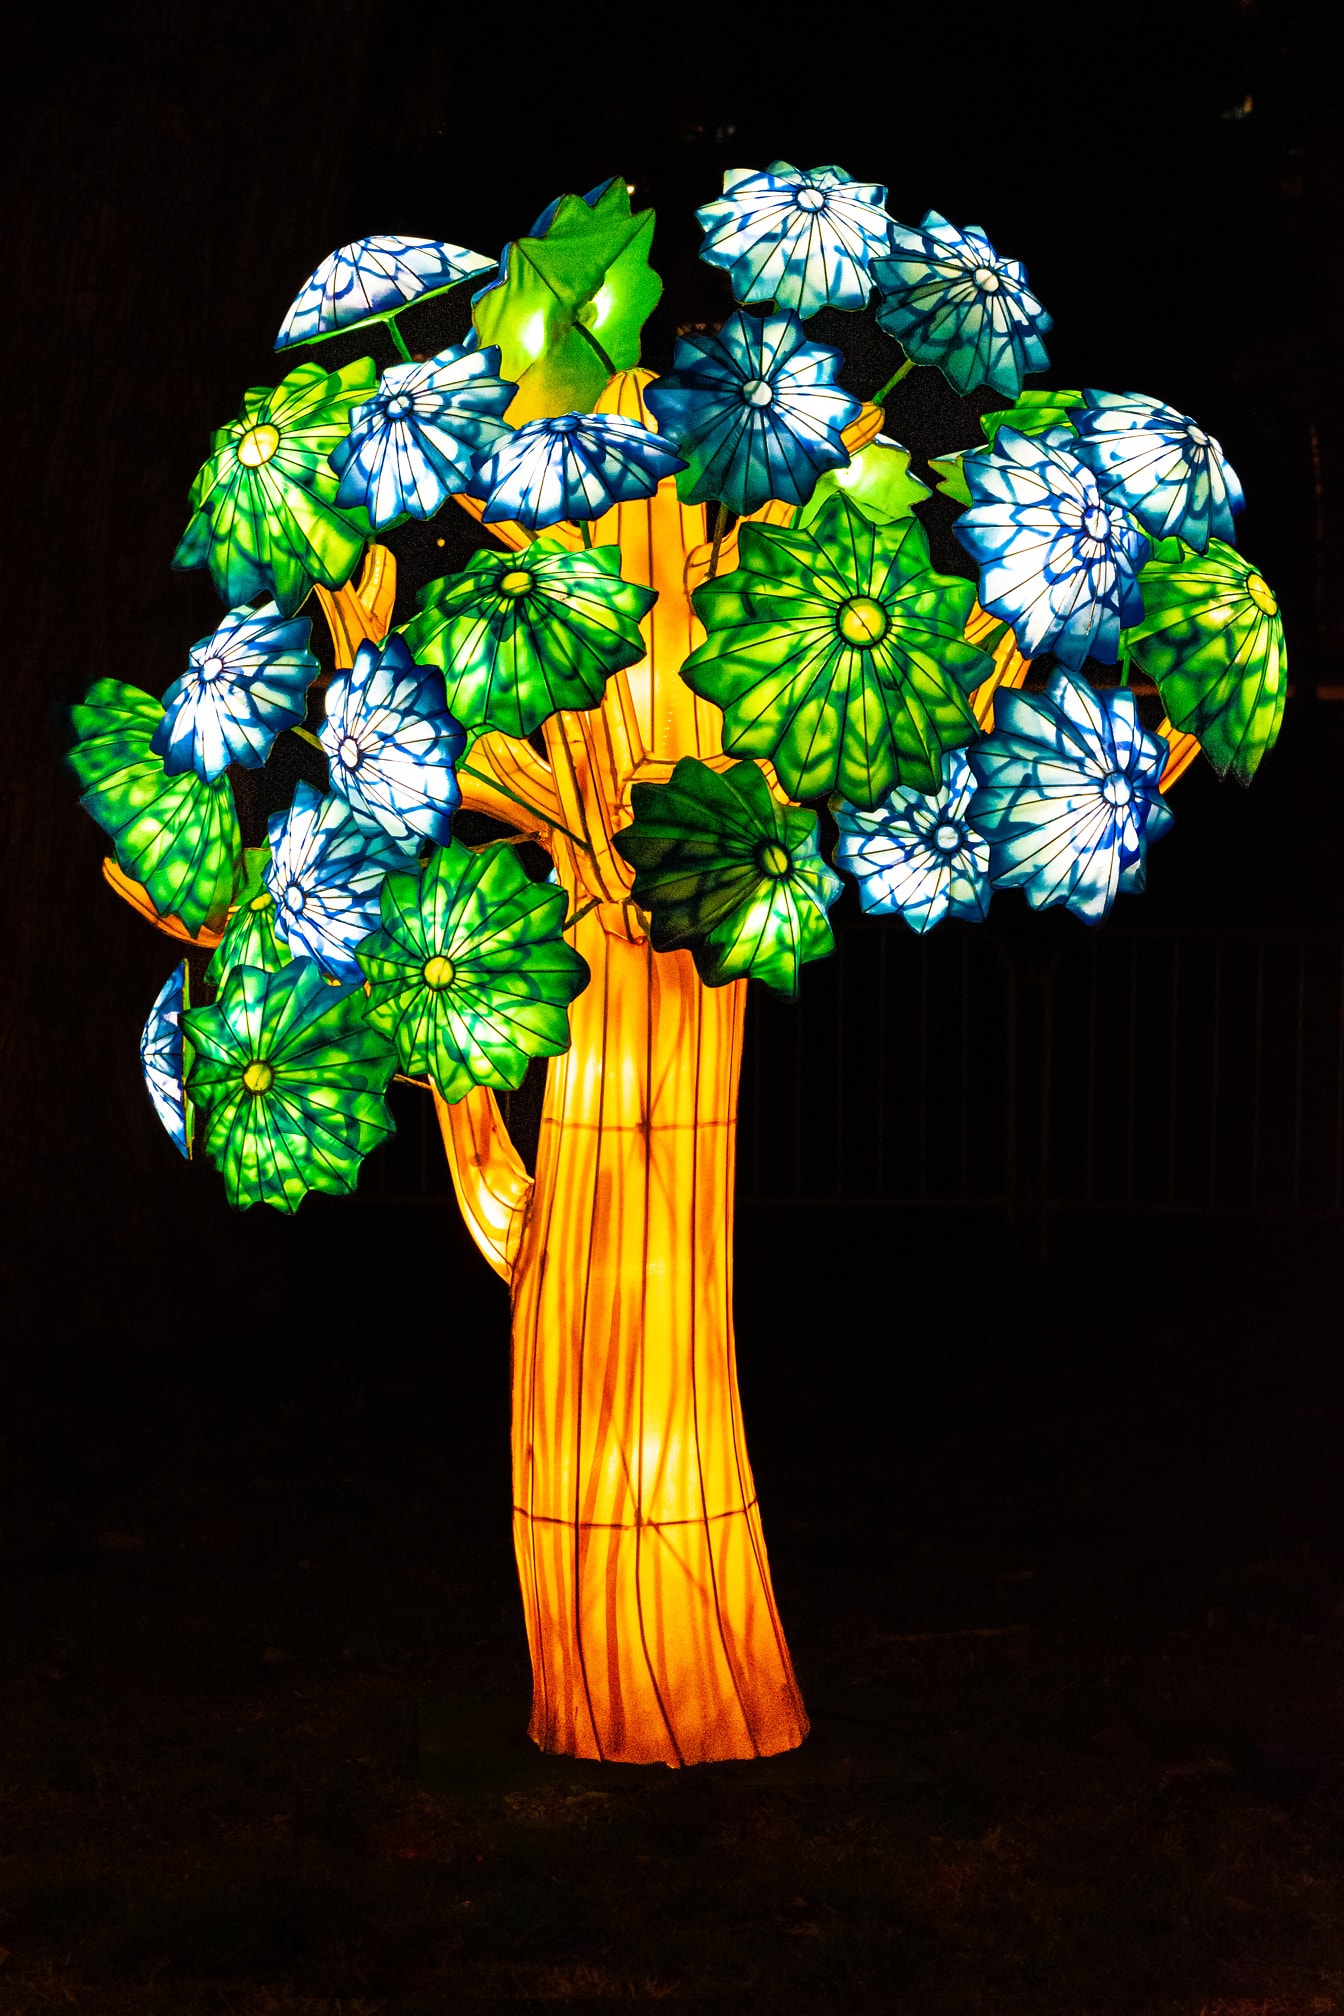 Glowing sculpture of tree with flowers at Chinese festival of light